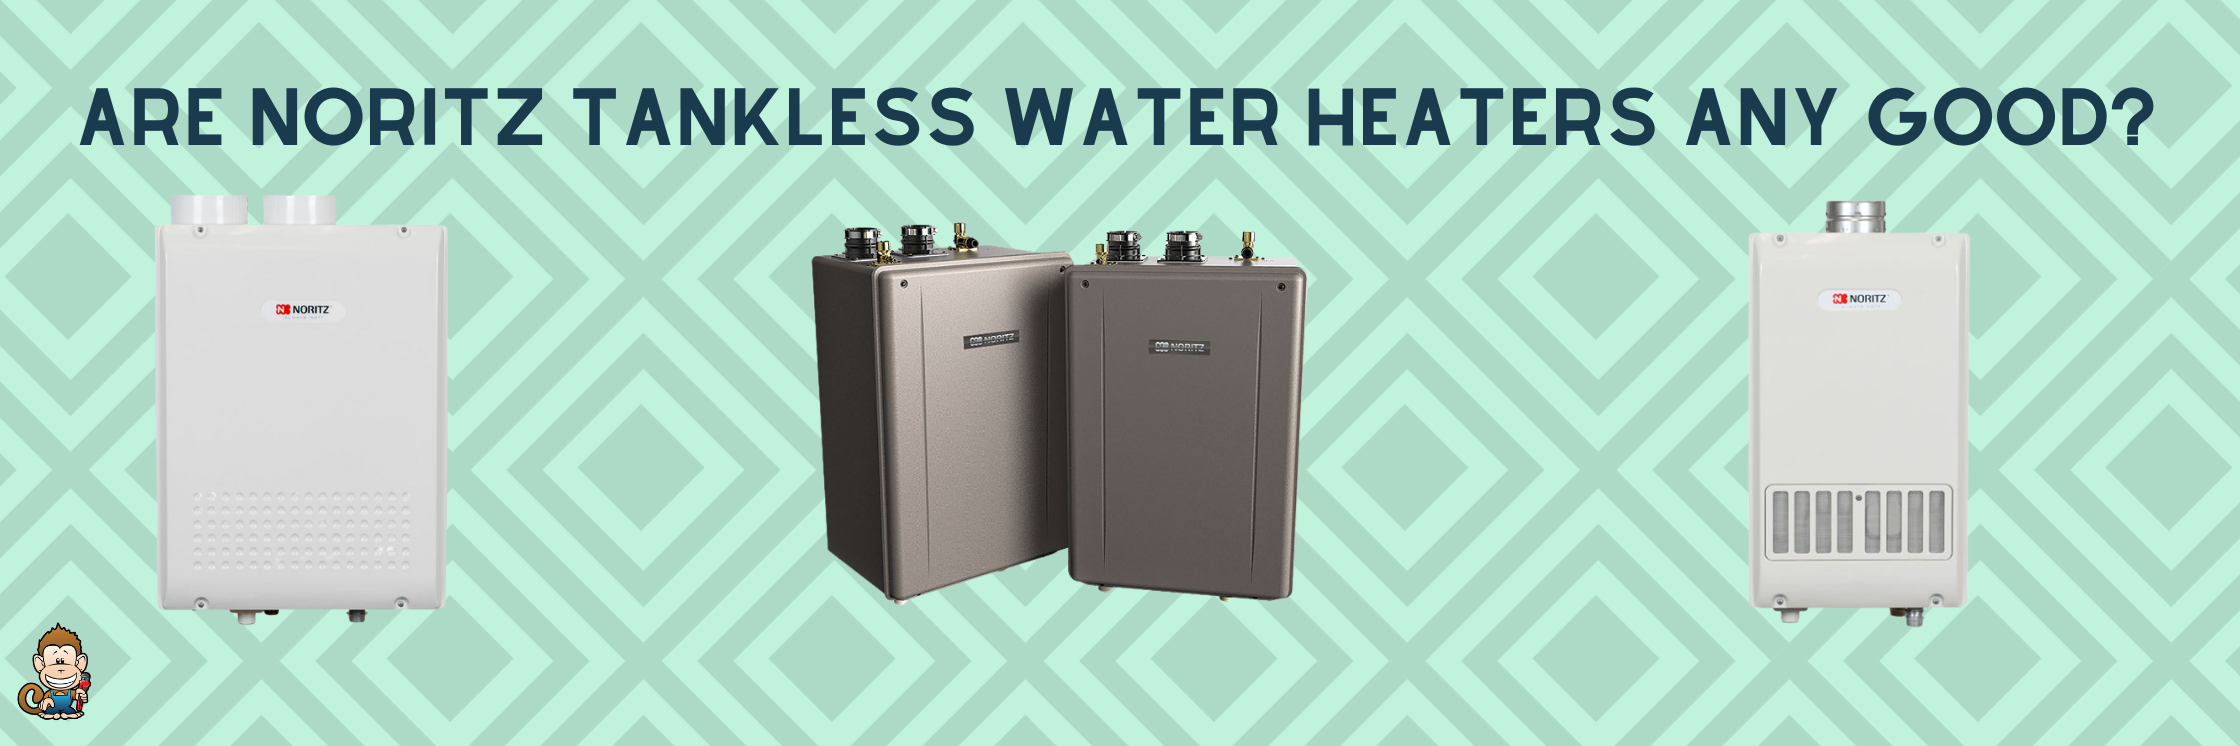 Are Noritz Tankless Water Heaters Any Good?